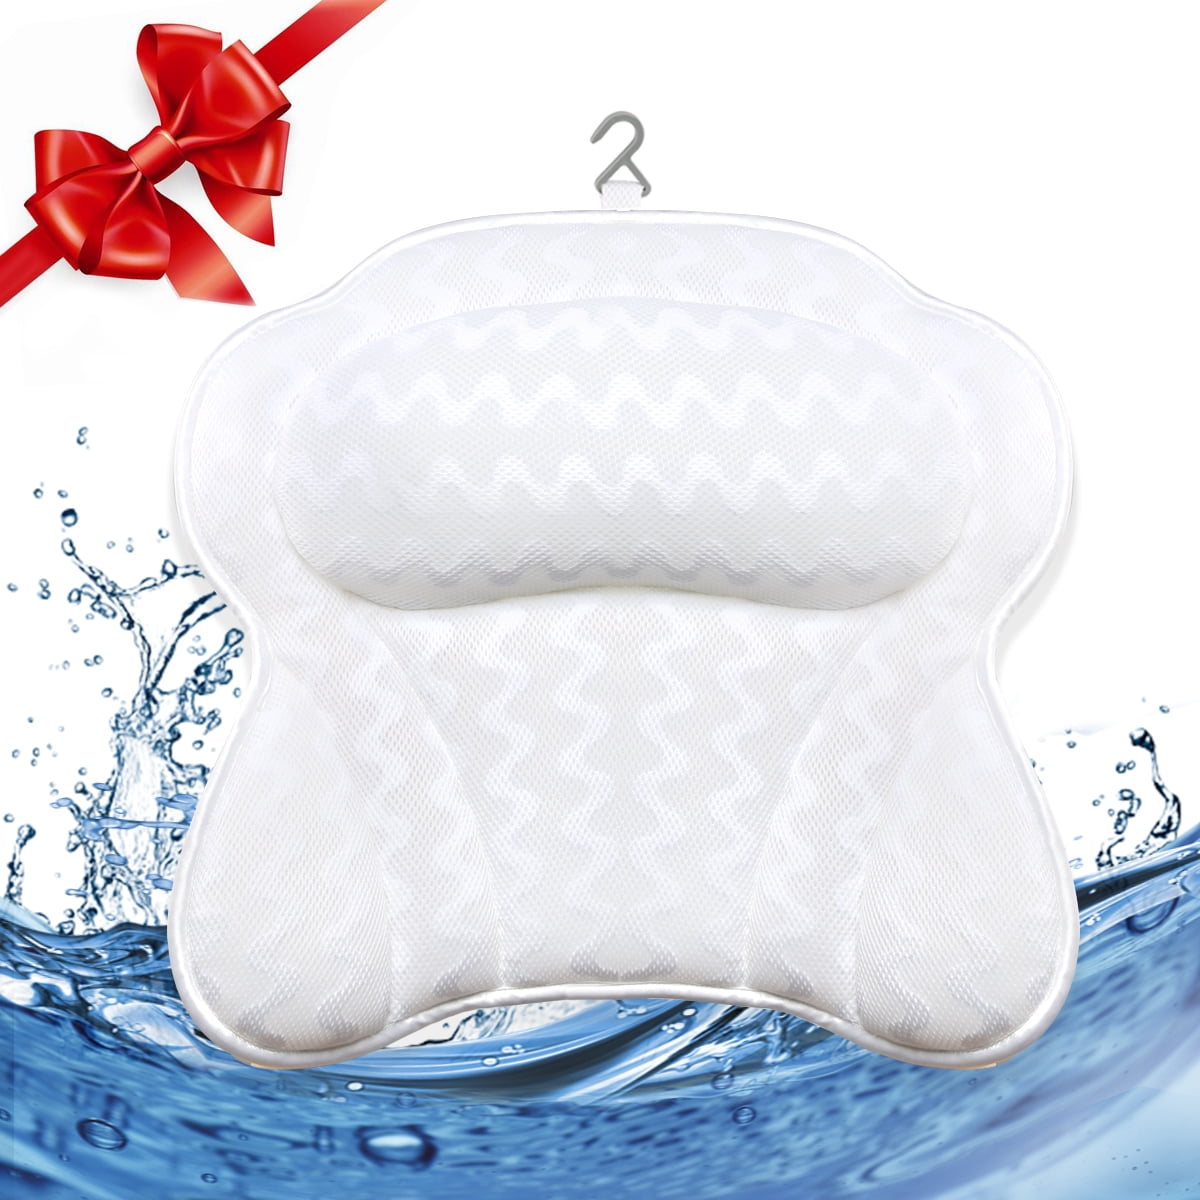 Bath Pillow Hollow Bathtub Spa Pillow With Suction Cups Easy To Install Convex 